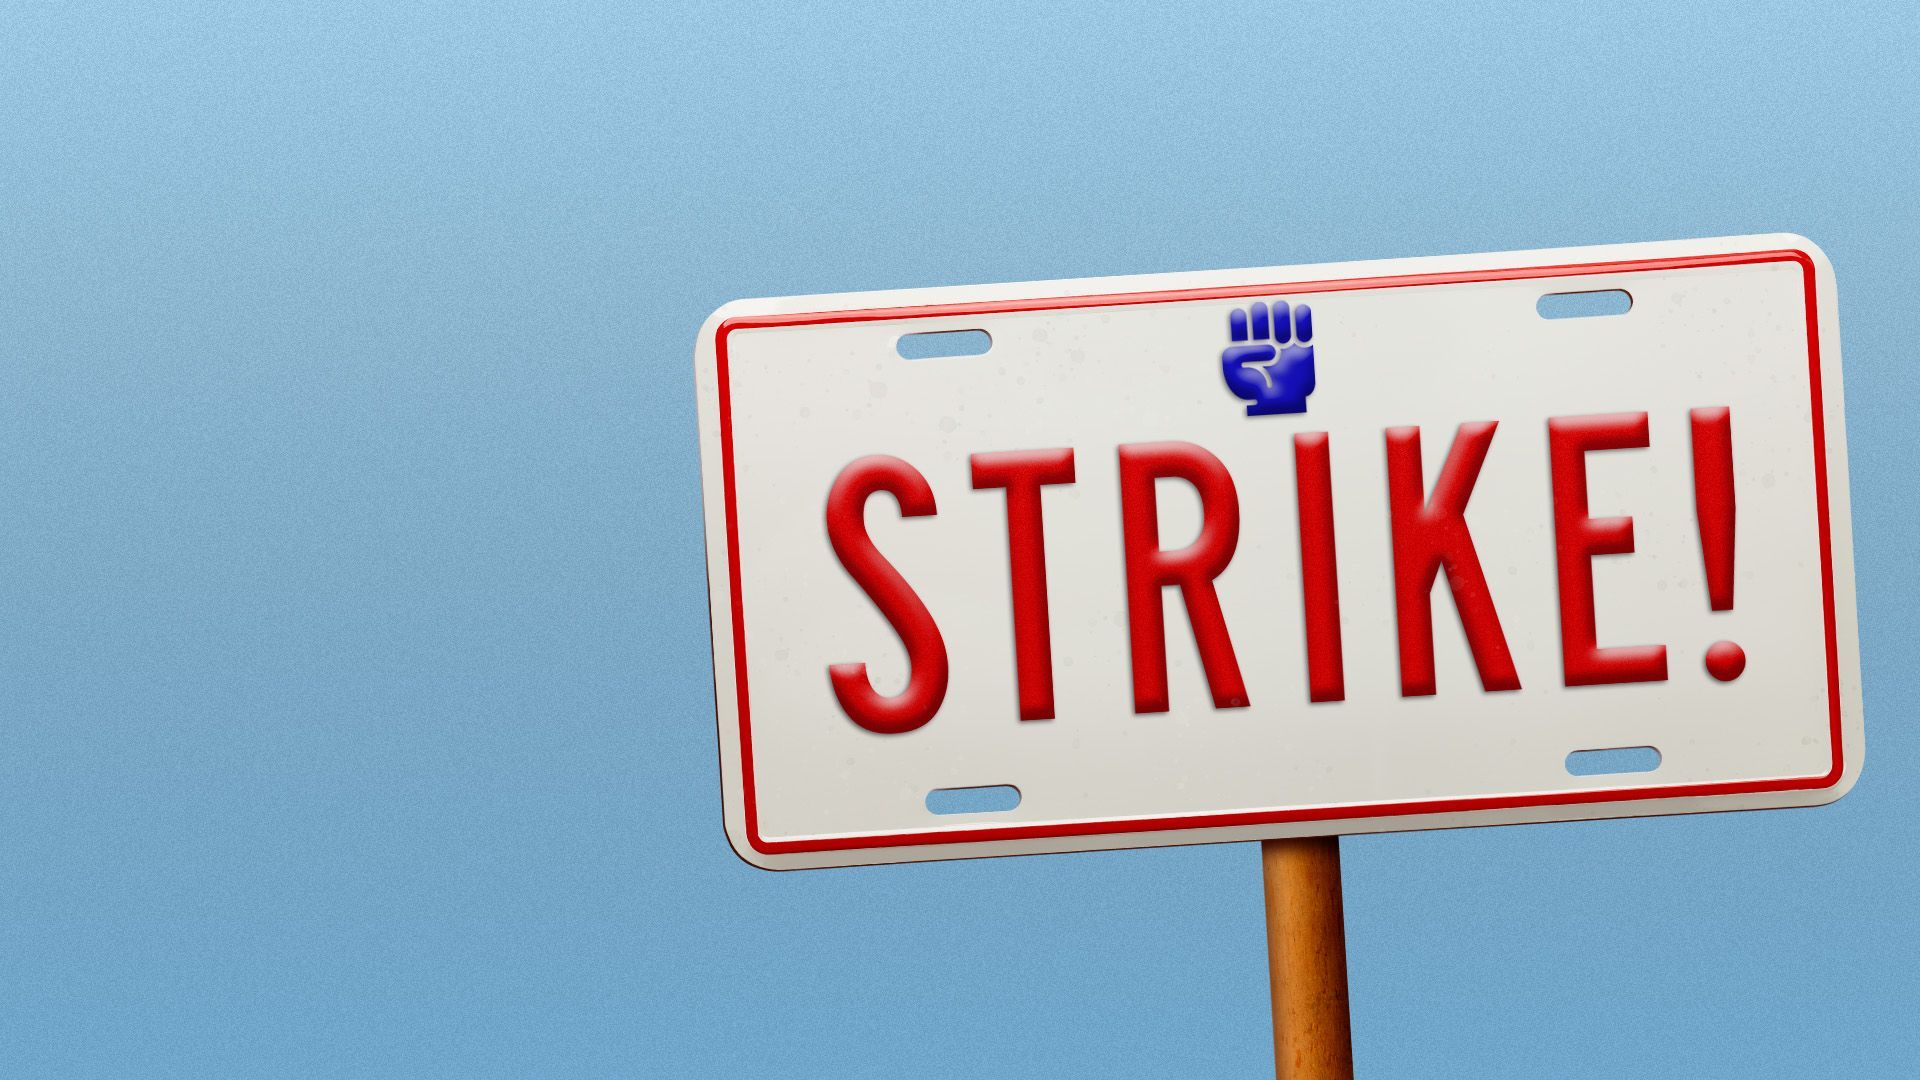 Illustration of a license plate that reads "strike!" as a protest sign